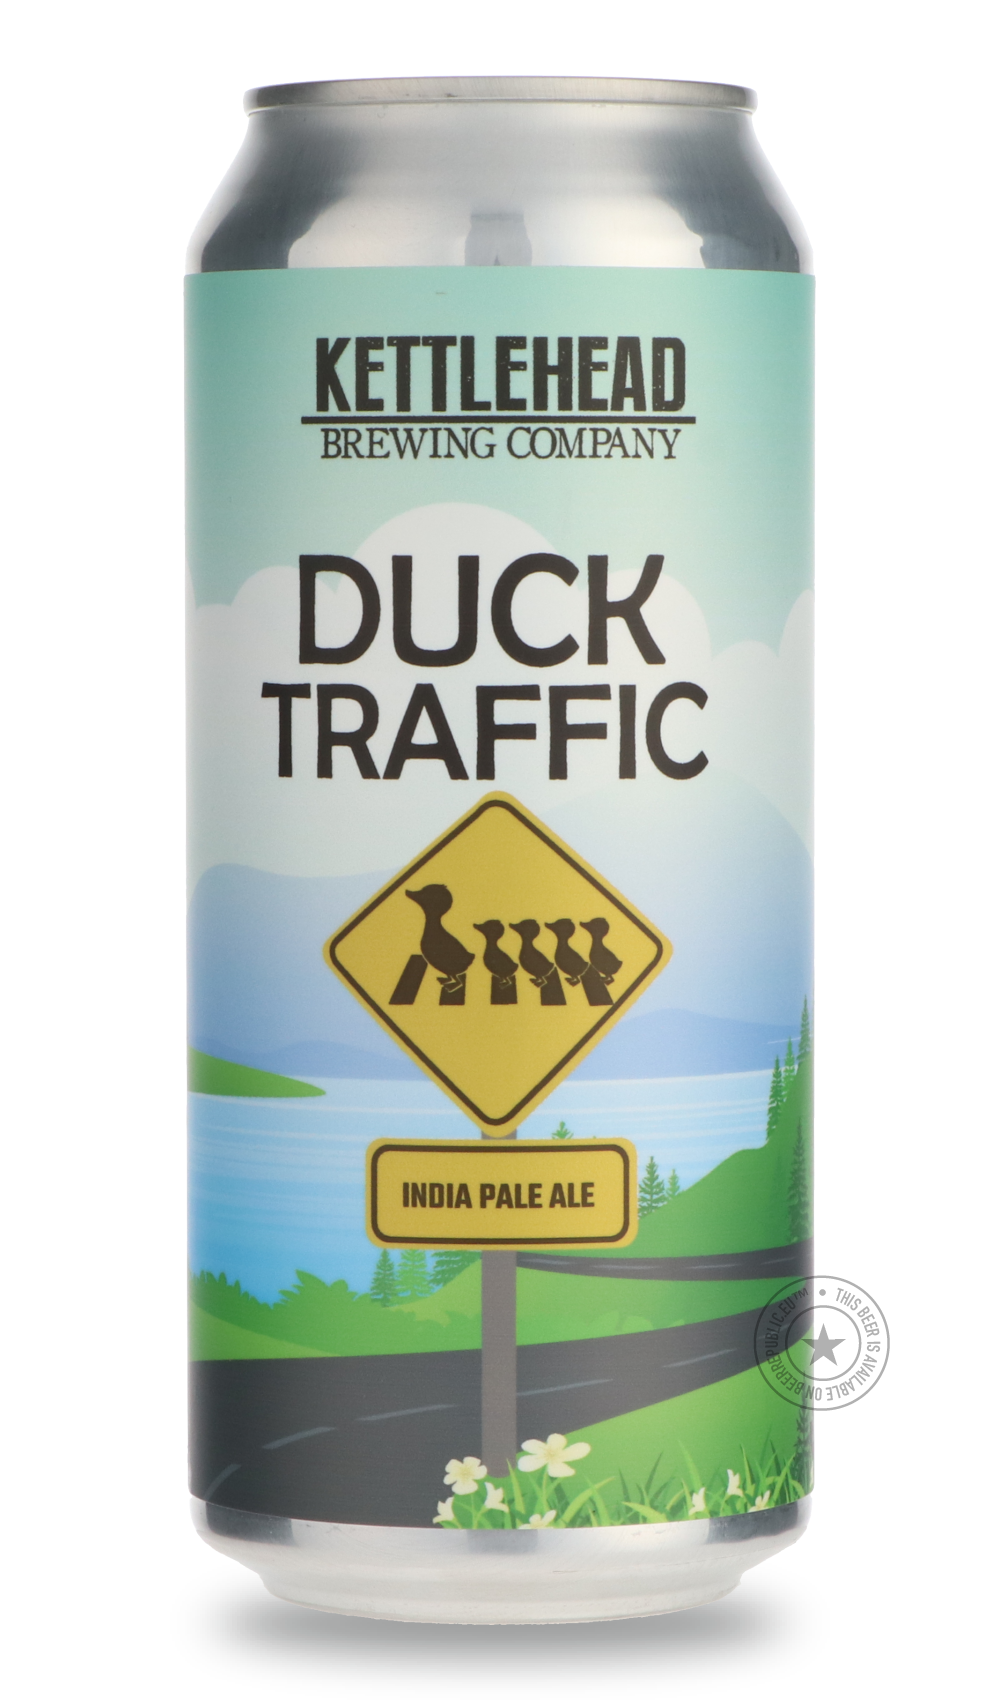 -Kettlehead- Duck Traffic-IPA- Only @ Beer Republic - The best online beer store for American & Canadian craft beer - Buy beer online from the USA and Canada - Bier online kopen - Amerikaans bier kopen - Craft beer store - Craft beer kopen - Amerikanisch bier kaufen - Bier online kaufen - Acheter biere online - IPA - Stout - Porter - New England IPA - Hazy IPA - Imperial Stout - Barrel Aged - Barrel Aged Imperial Stout - Brown - Dark beer - Blond - Blonde - Pilsner - Lager - Wheat - Weizen - Amber - Barley 